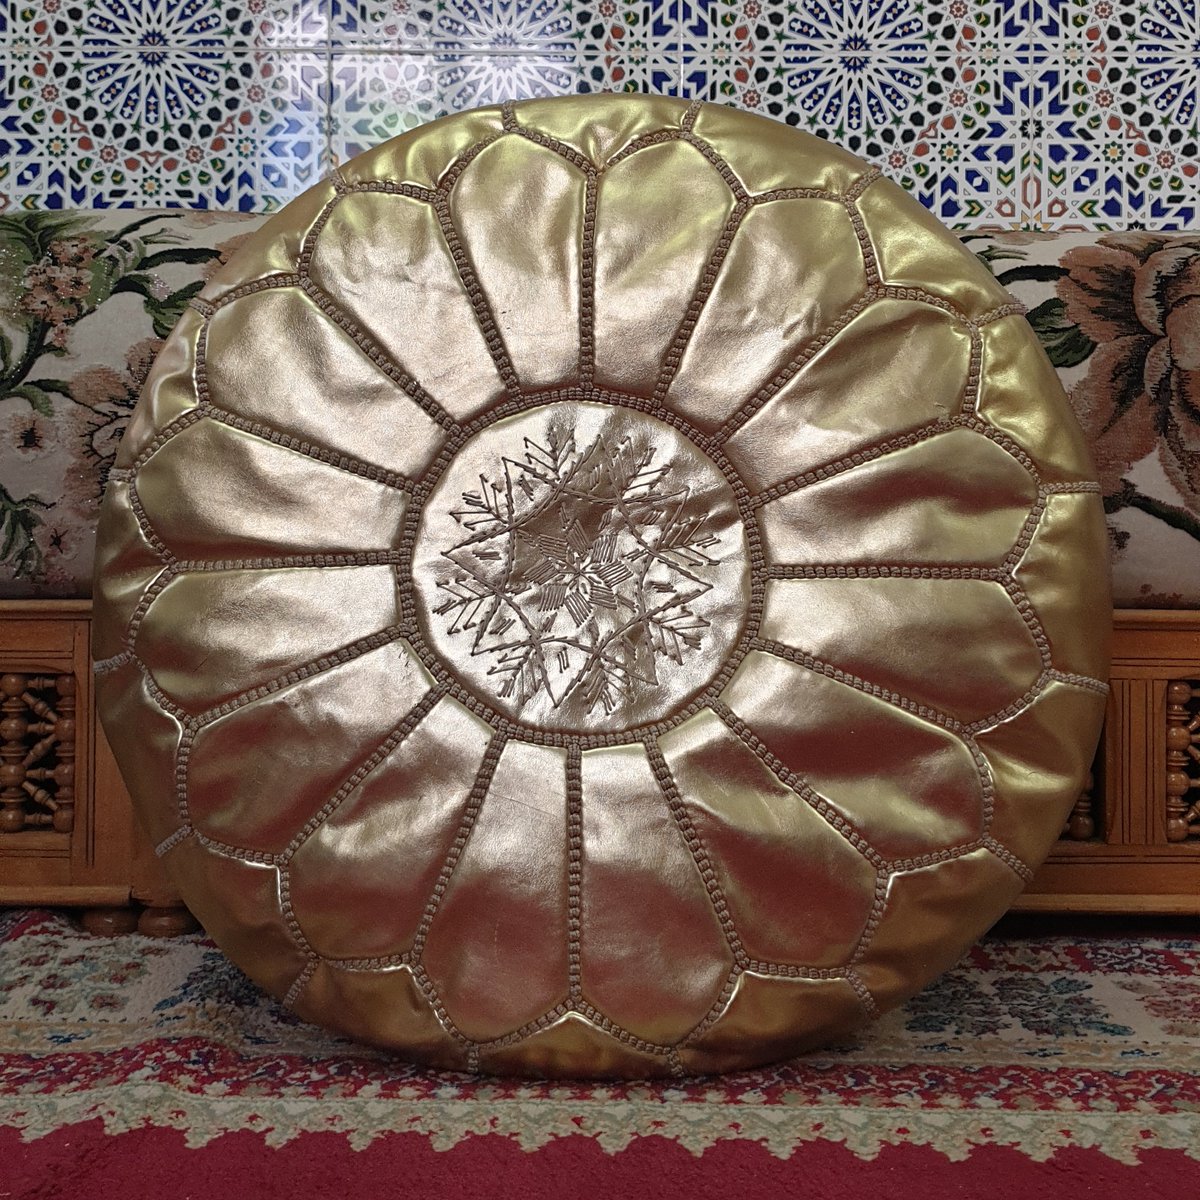 Transform your living space with the timeless charm of Moroccan craftsmanship! 🧡✨ Embrace the beauty of our Handmade Beldi Leather Gold Pouf    etsy.me/3EGhc7v #MoroccanPouf #BeldiLeather #HandcraftedElegance #VintageOttoman @ArgyllSeaGlass #handmade  #Moroccan #Maroc